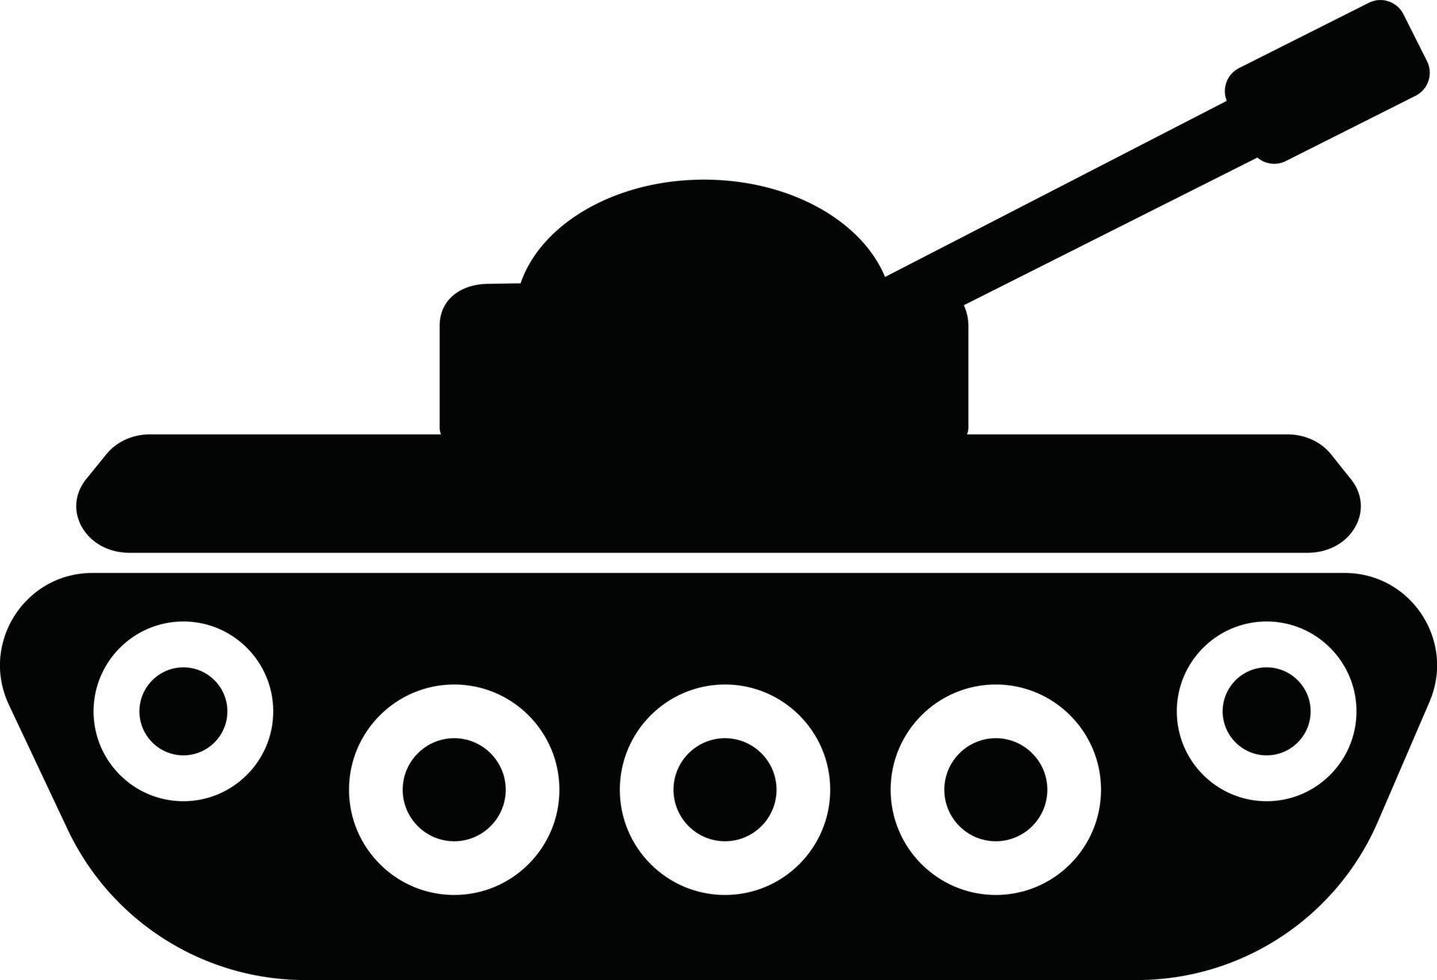 filled tank super icon. tank sign. war symbol. army sign. vector